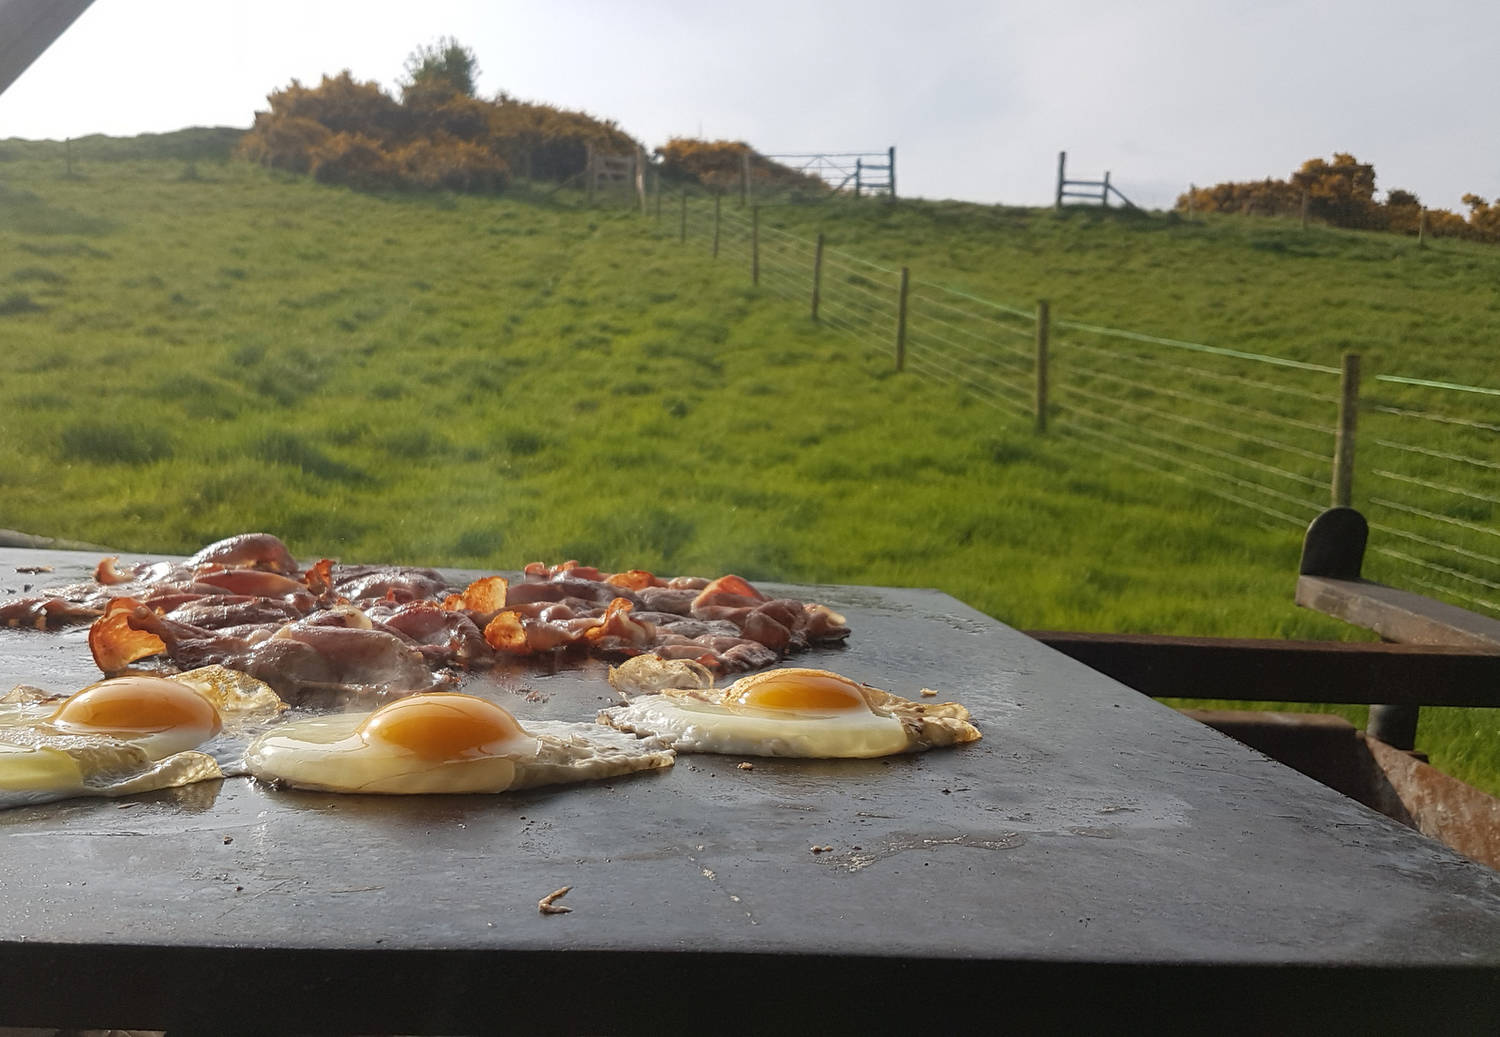 A photograph of eggs and bacon being cooked outdoors with a view of a field.